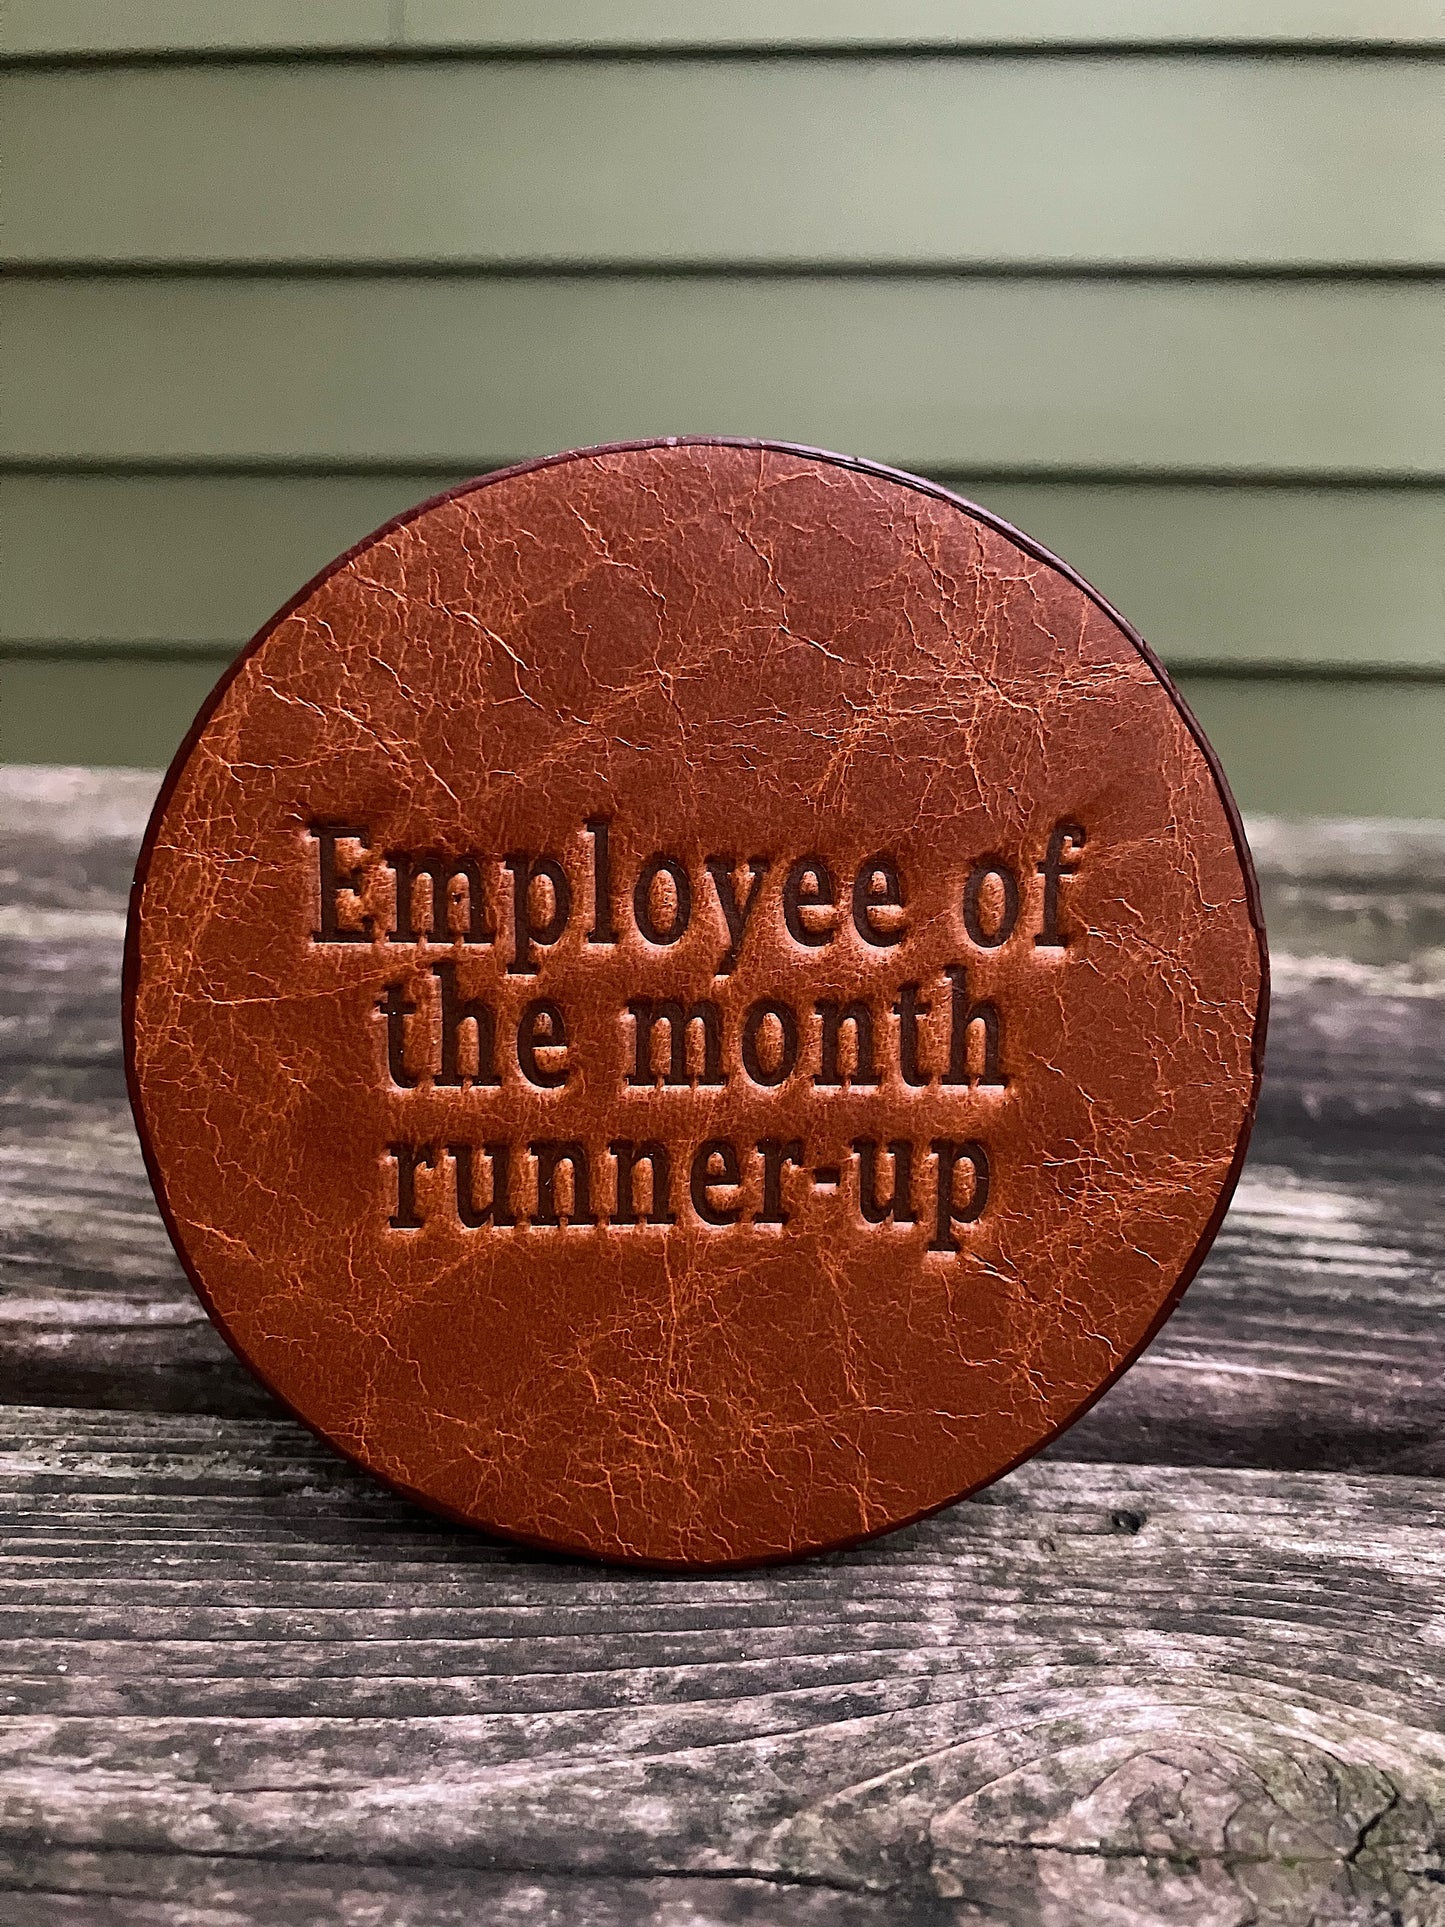 Leather Coaster - Employee Of The Month Runner-Up